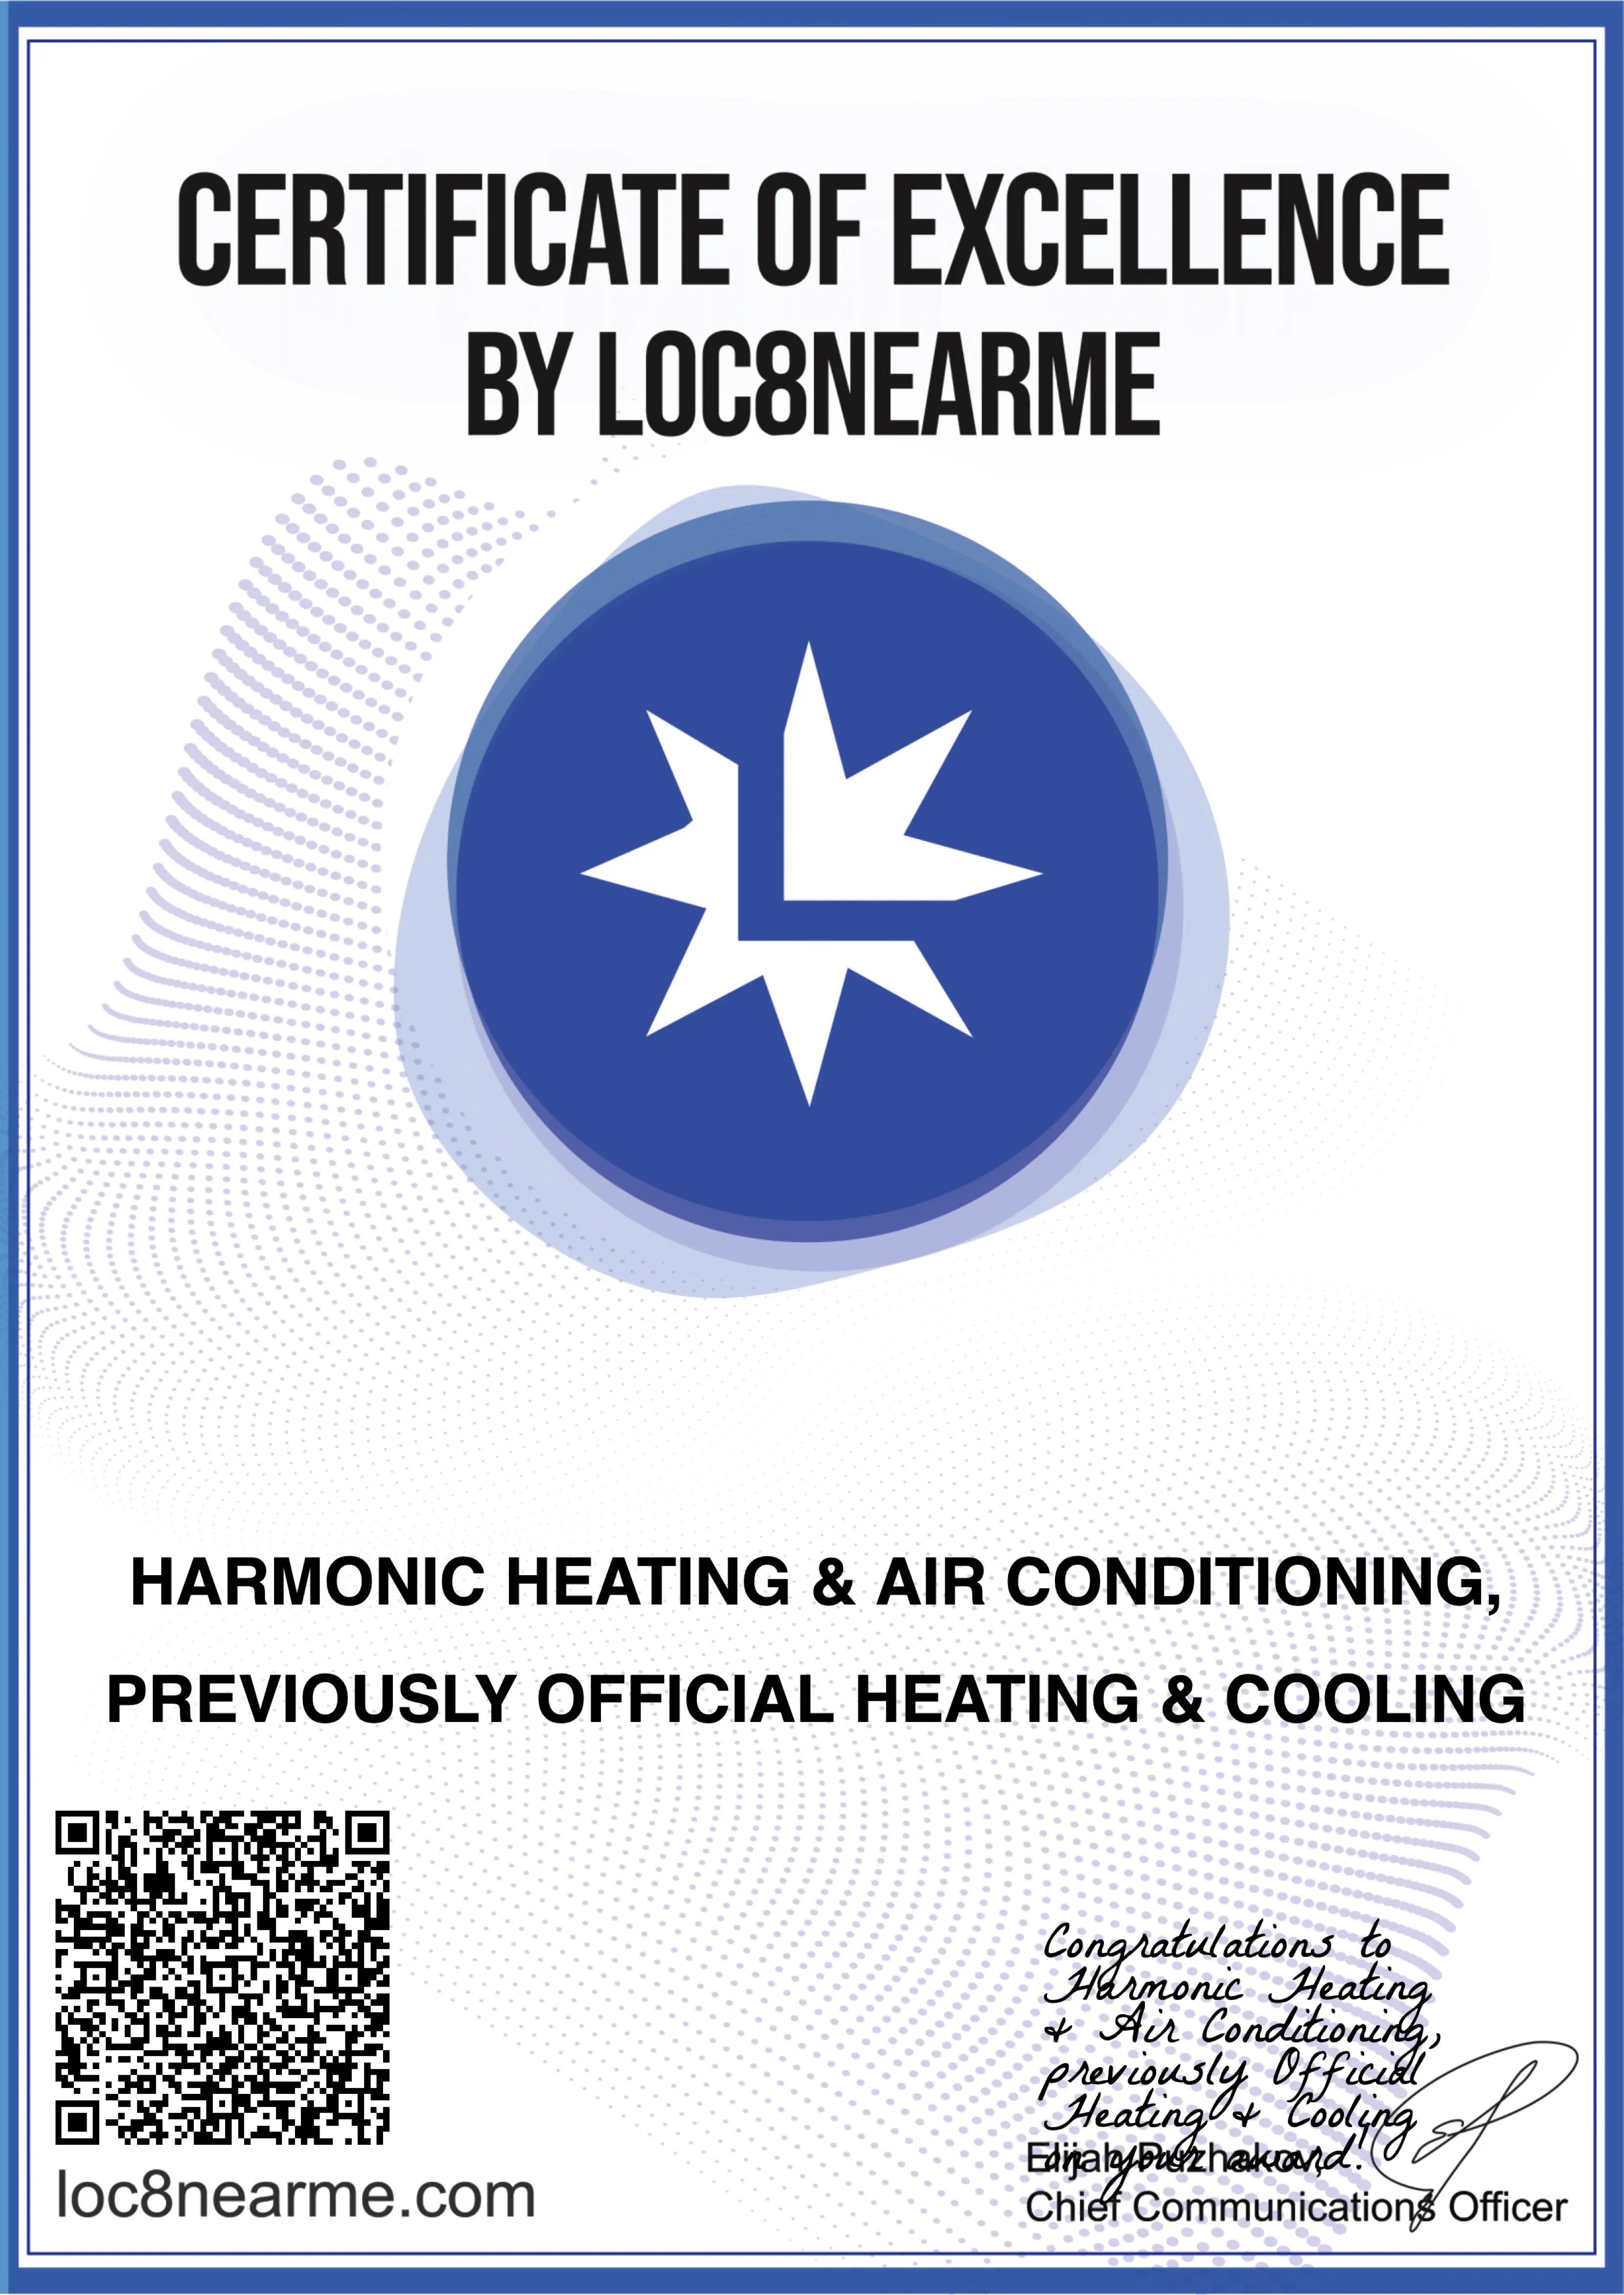 Call Harmonic HVAC for your services.